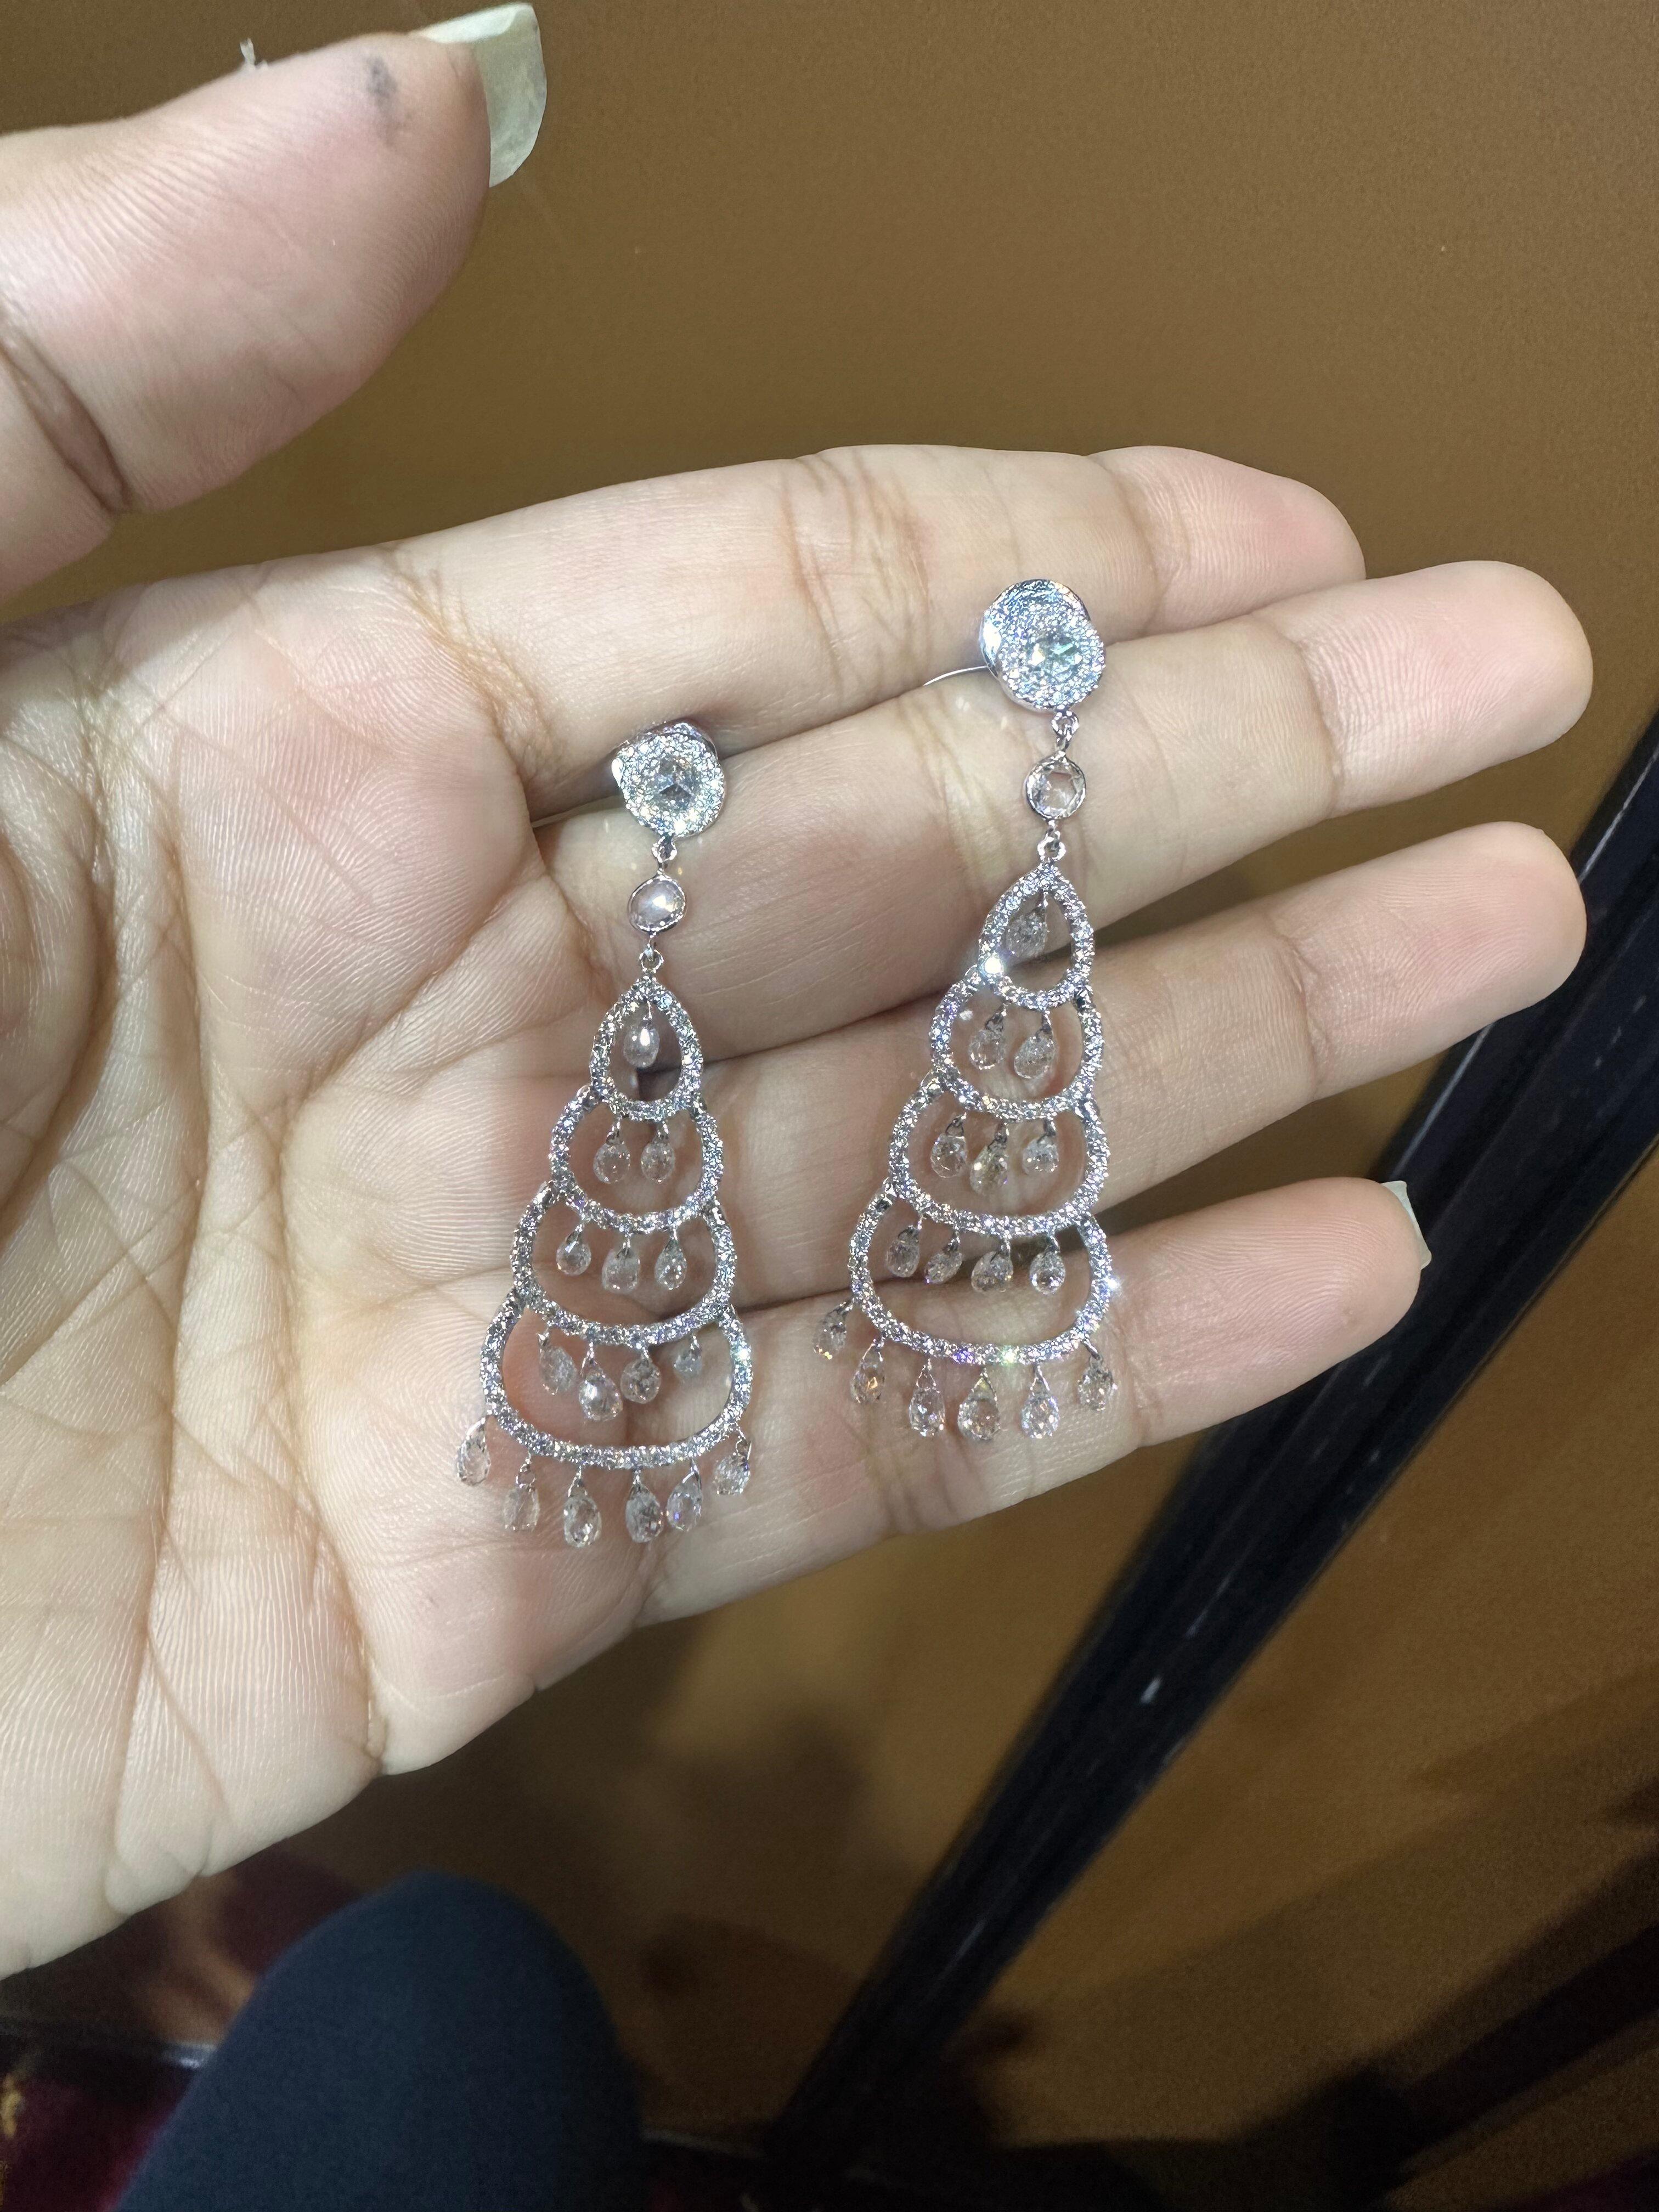 PANIM 6.24 Carat Christmas Tree 18K White Gold Diamond Earrings

These Panim earrings are a perfect for the upcoming holiday season. The diamond briolletes catch the light and sparkle beautifully, making them a great choice for festive occasions.